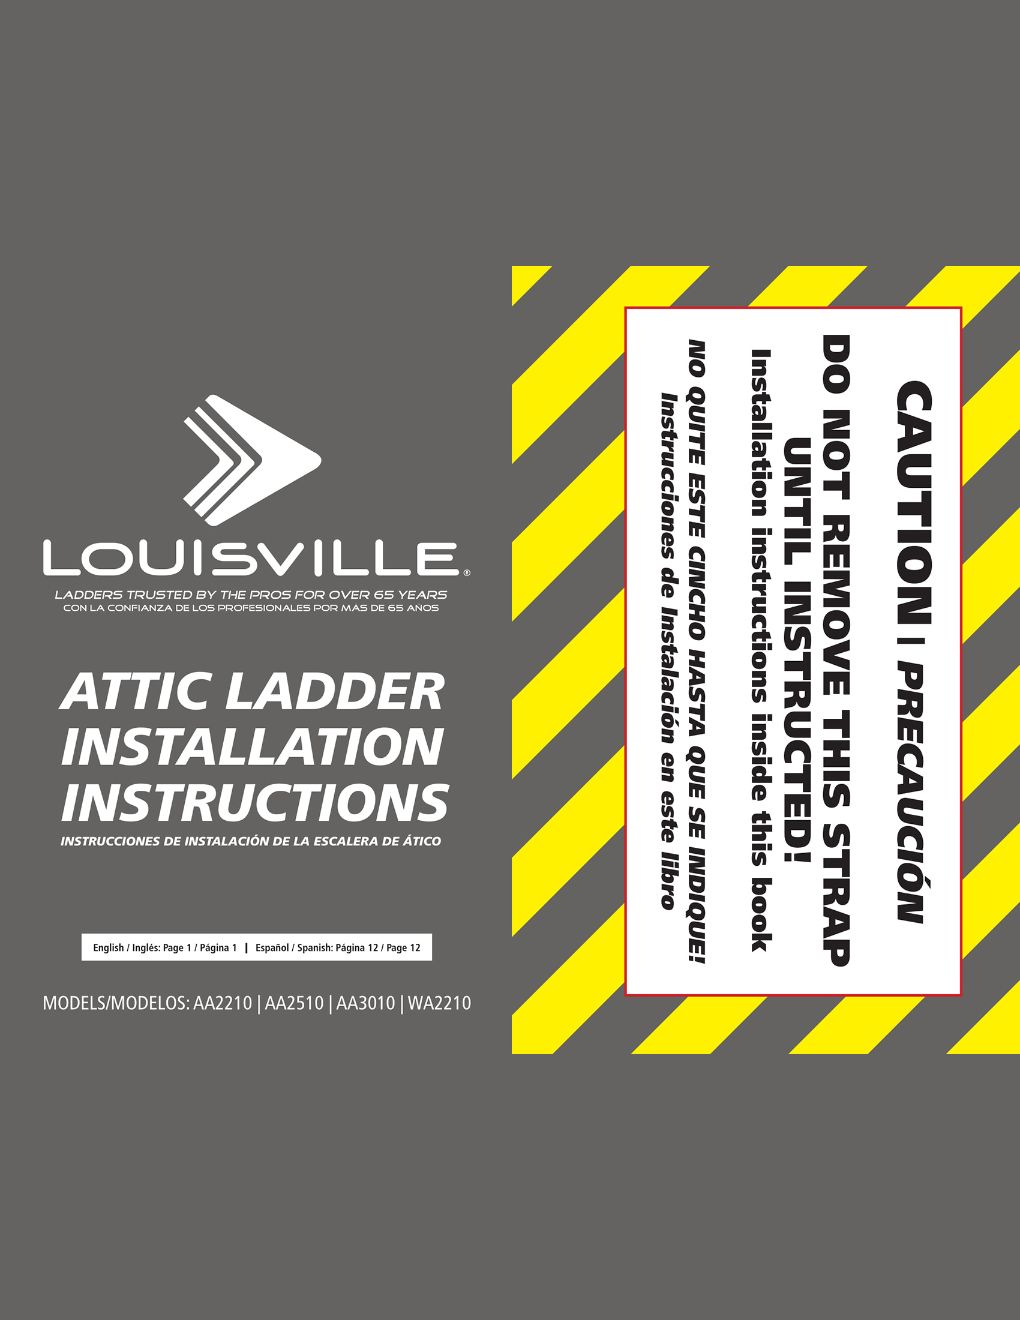 AA2210 and AA2510 Attic Ladders Installation Instructions Marketing Material Image